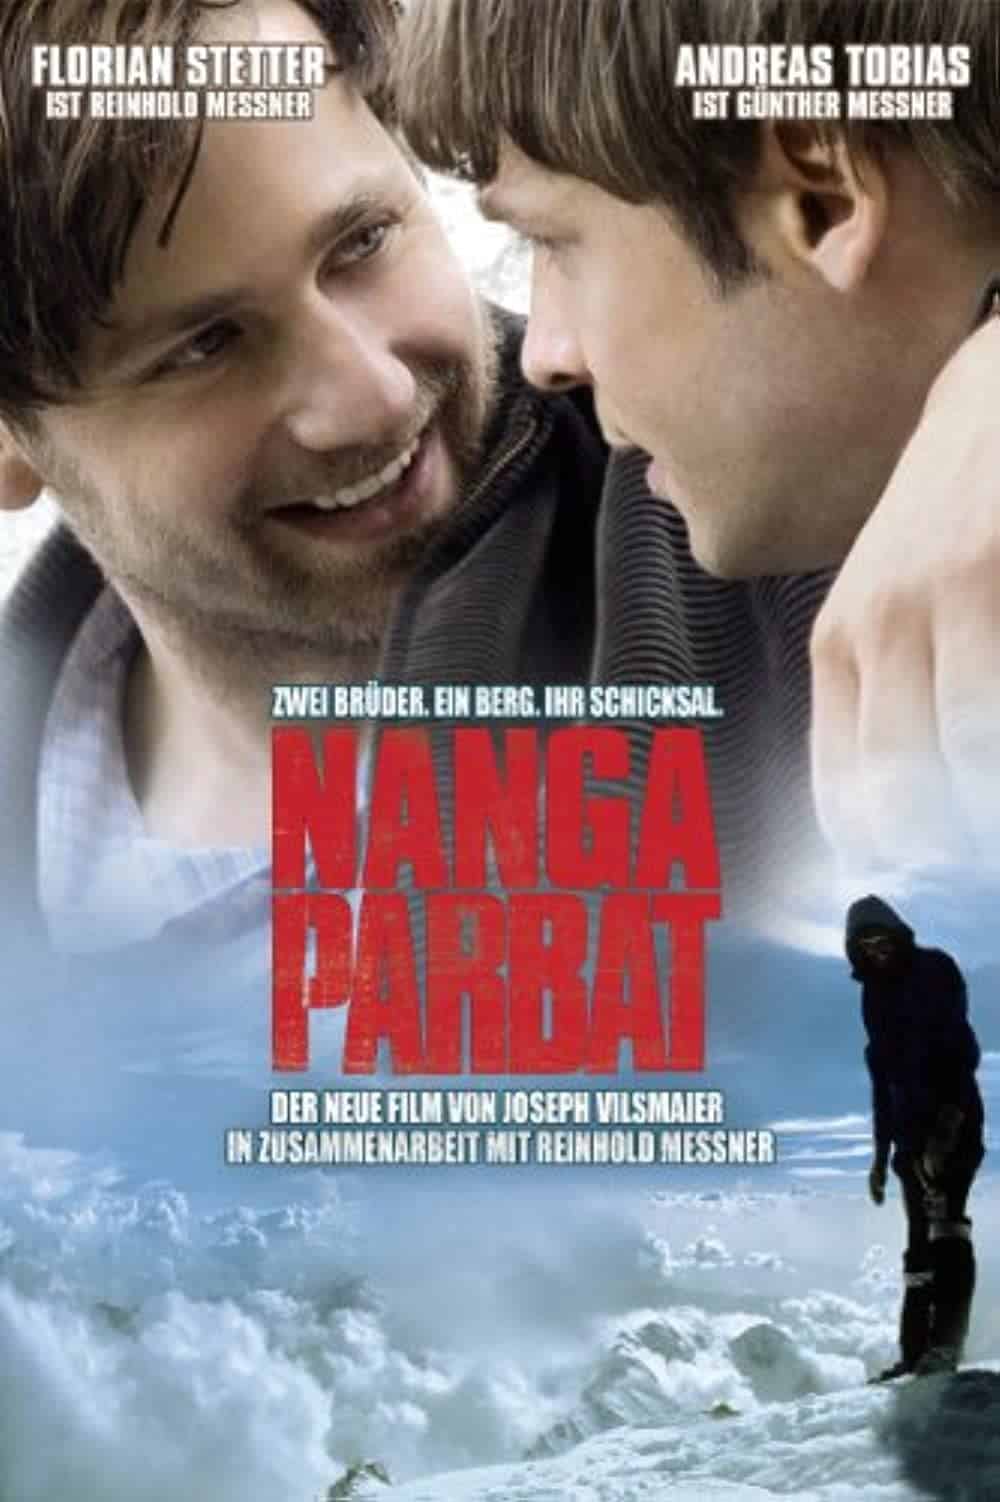 Nanga Parbat (2010) Best Mountaineering Movies You Can't Miss